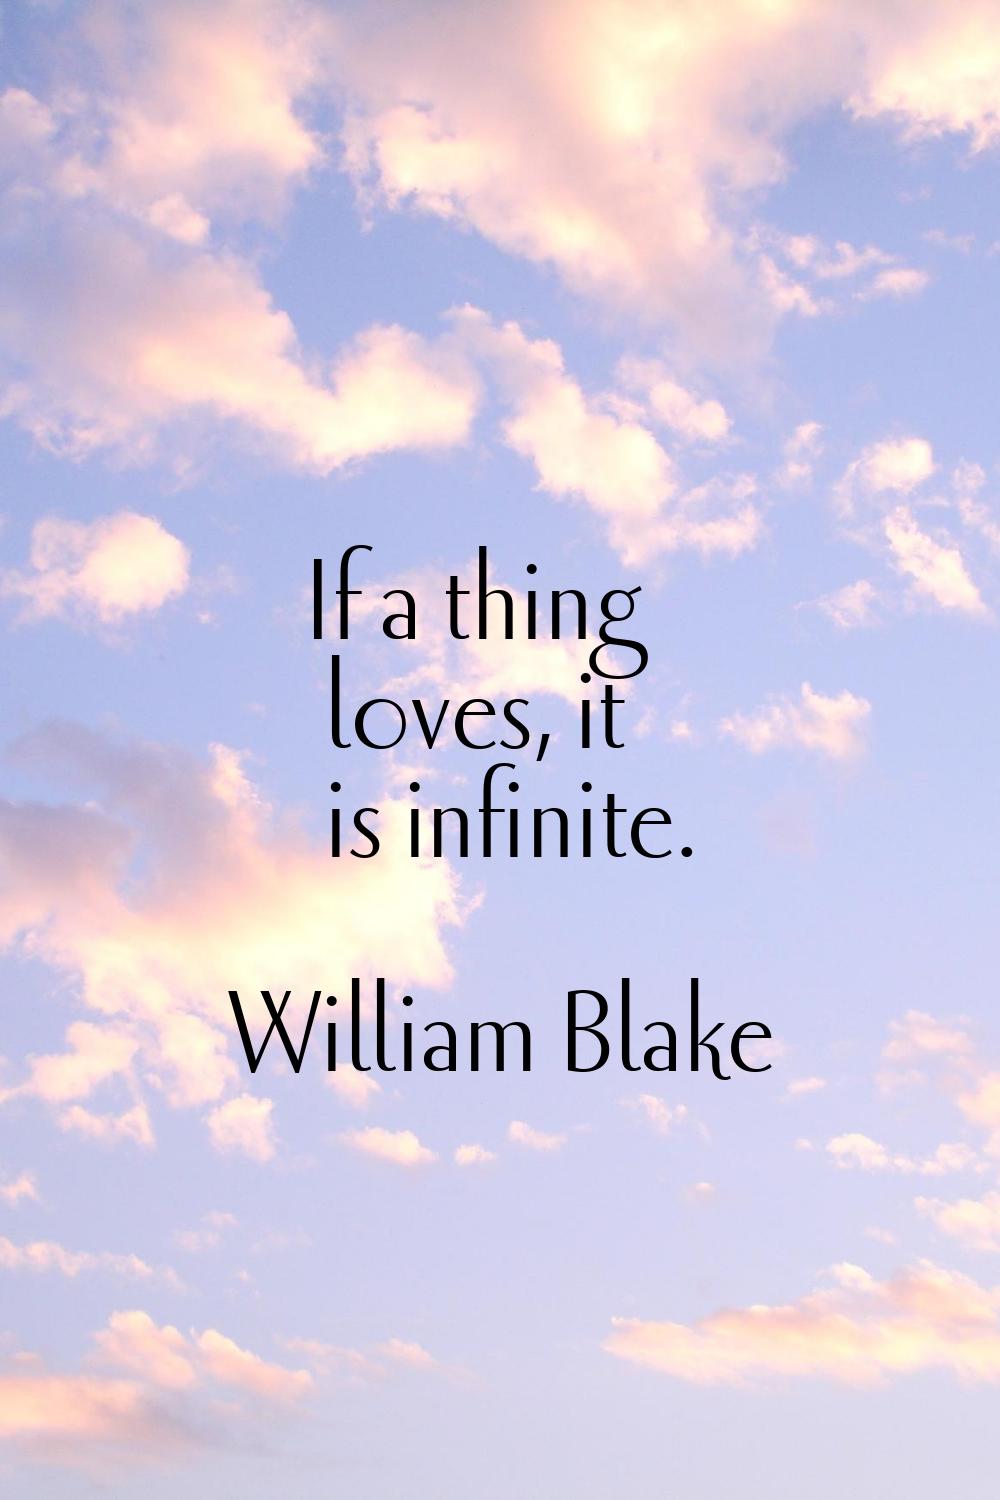 If a thing loves, it is infinite.